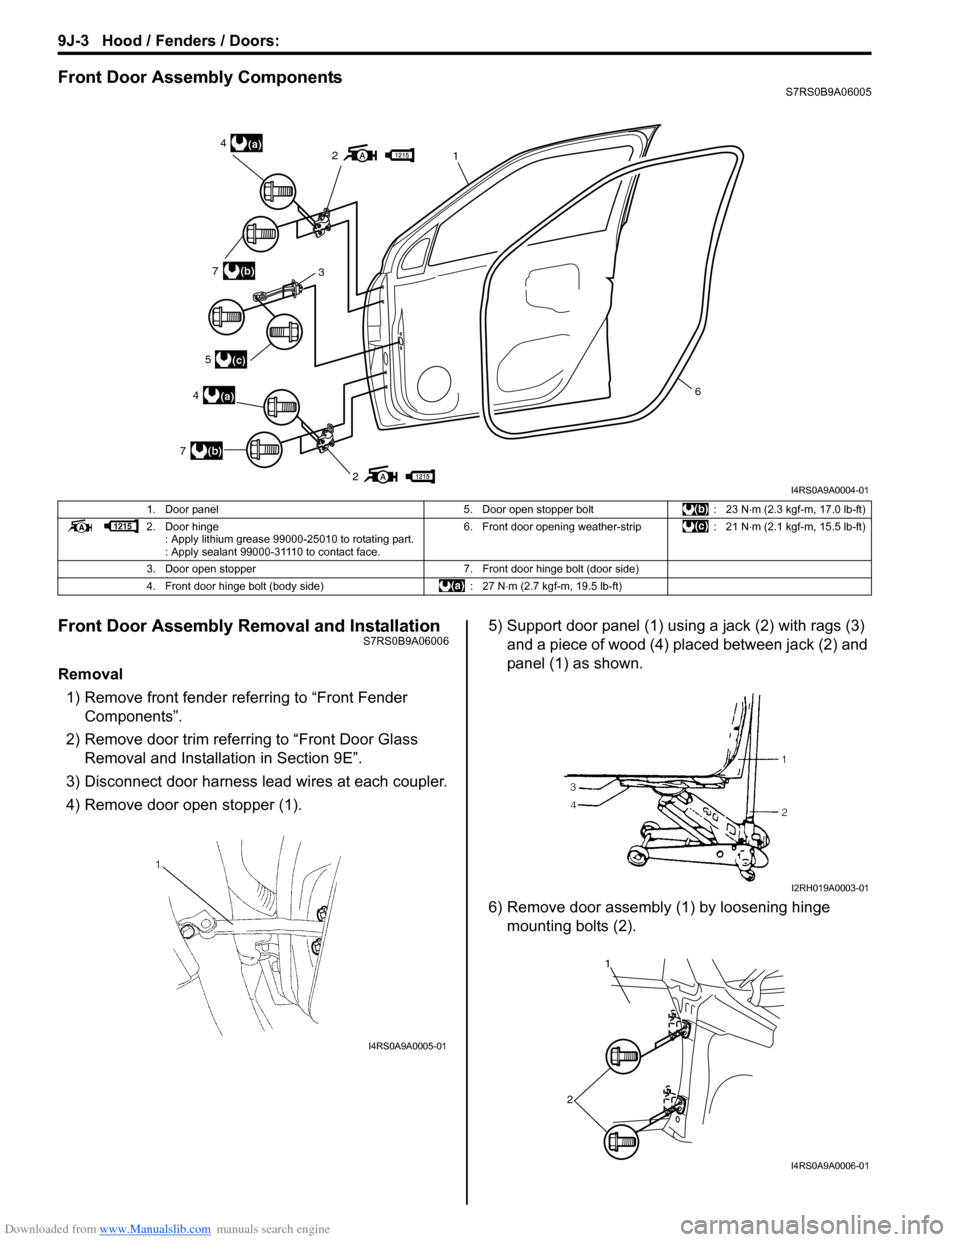 SUZUKI SWIFT 2007 2.G Service Workshop Manual Downloaded from www.Manualslib.com manuals search engine 9J-3 Hood / Fenders / Doors: 
Front Door Assembly ComponentsS7RS0B9A06005
Front Door Assembly Removal and InstallationS7RS0B9A06006
Removal1) R